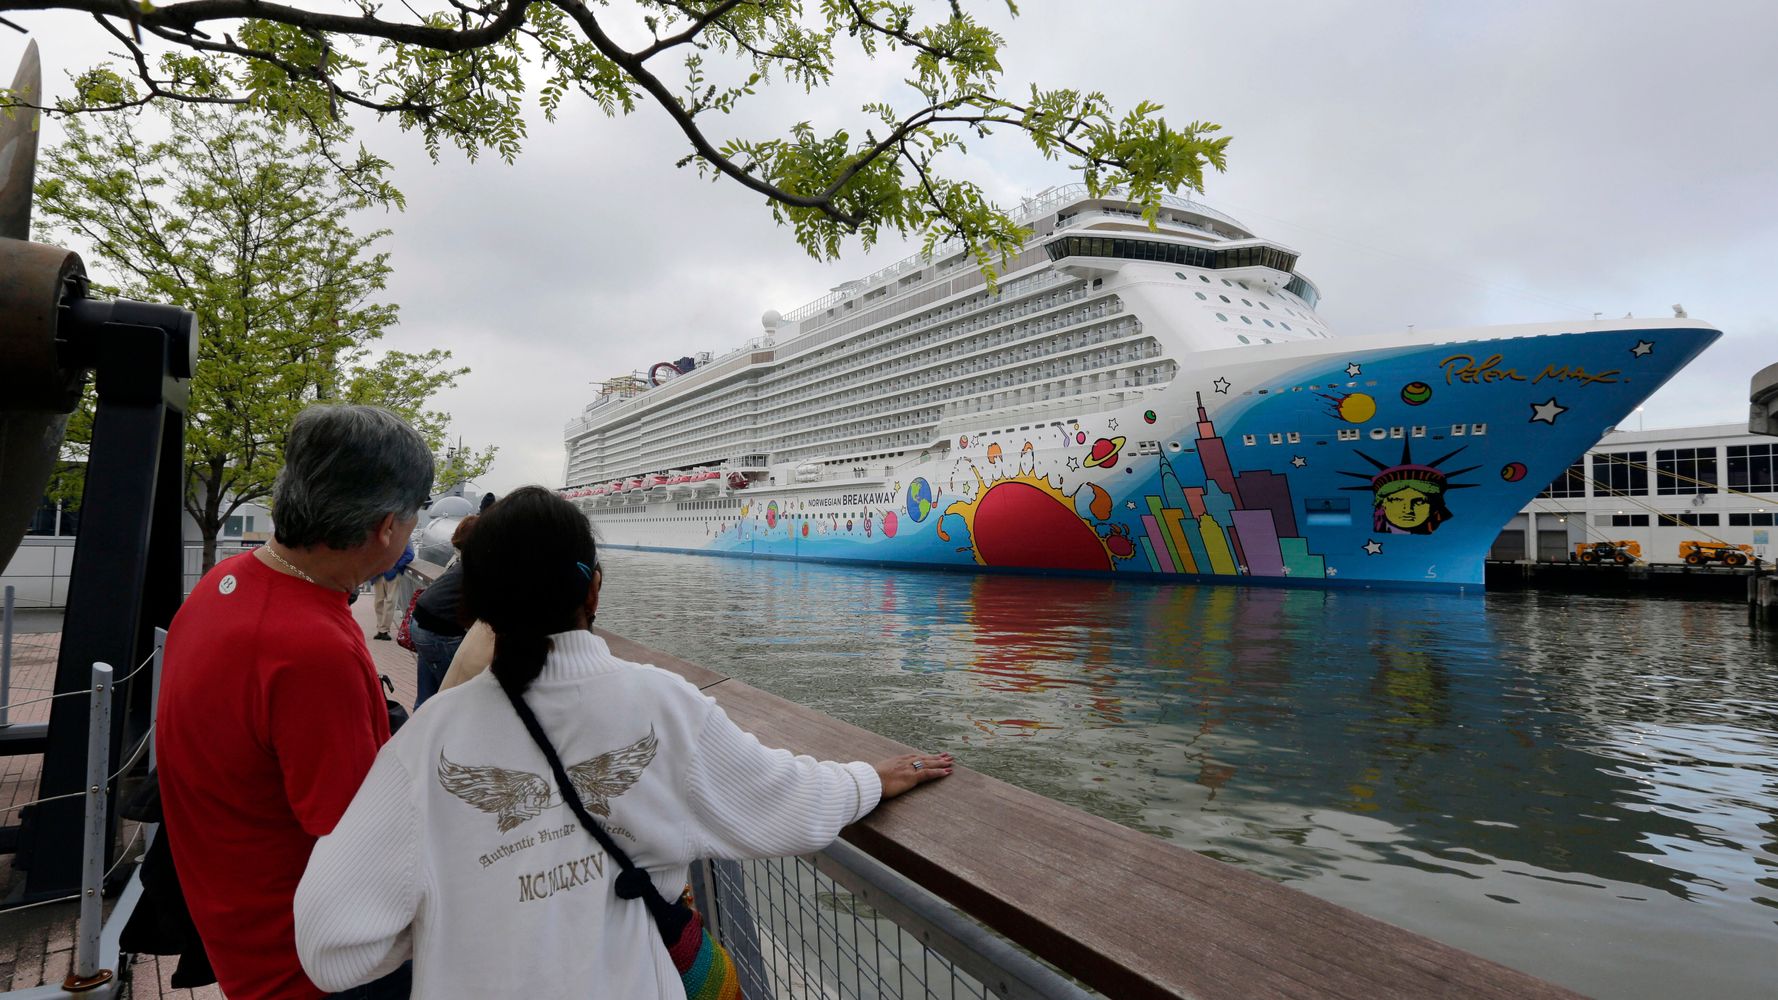 Cruise Ship With COVID-19 Infections Arrives In New Orleans | HuffPost Latest News